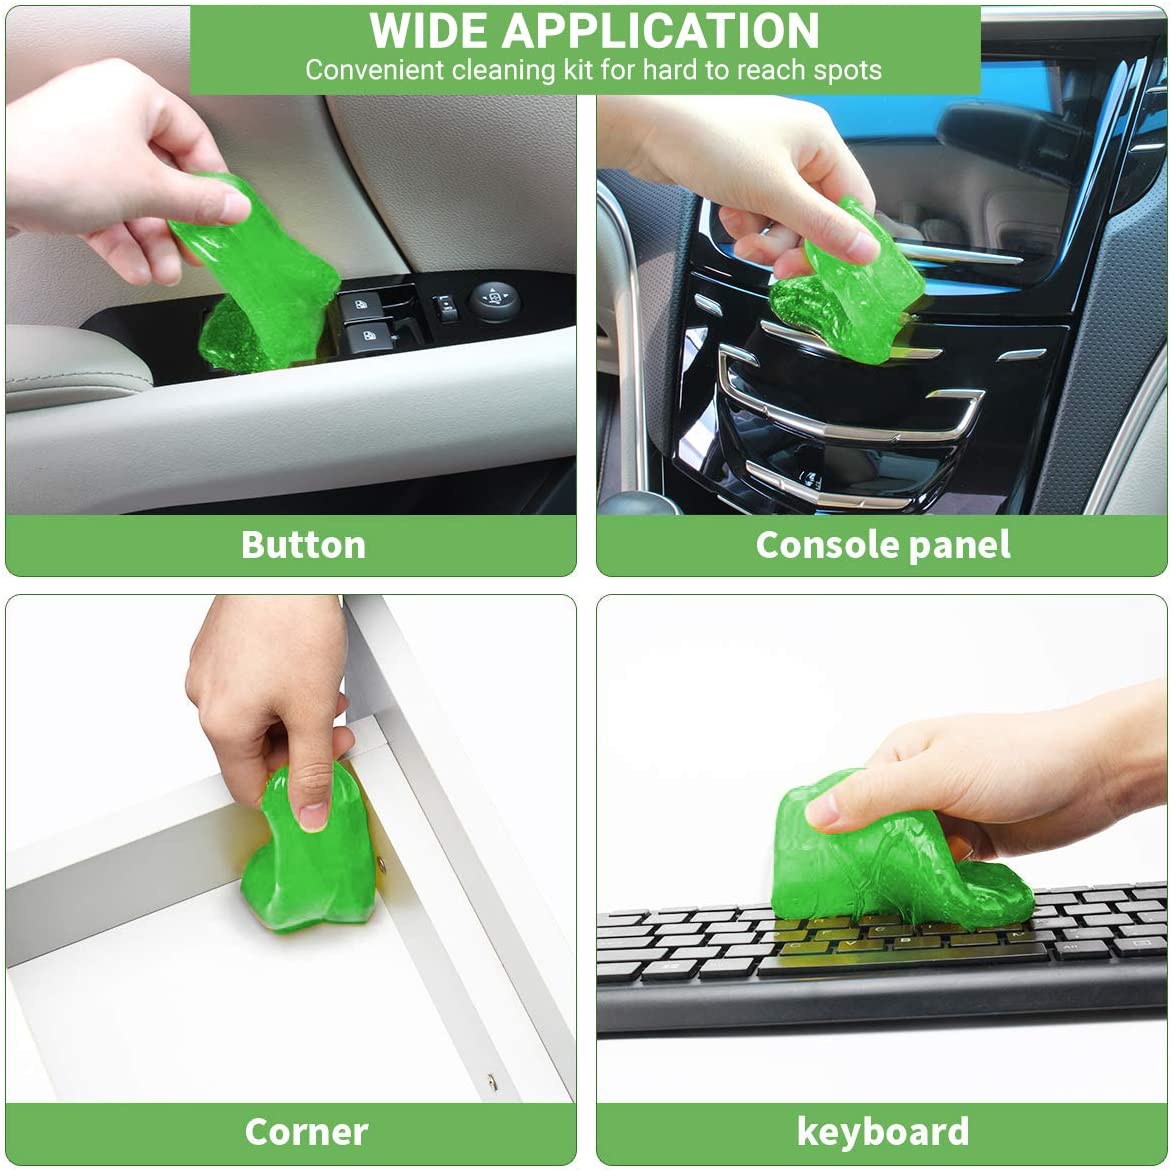 ULTRICS Keyboard Dust Cleaner, Magic Sticky Gel Putty Soft Flexible Cleaning Kit for PC Computer Laptop MacBook Remote Control Mobile Telephone Printer Car Air Vents Dashboard Type Writer and More